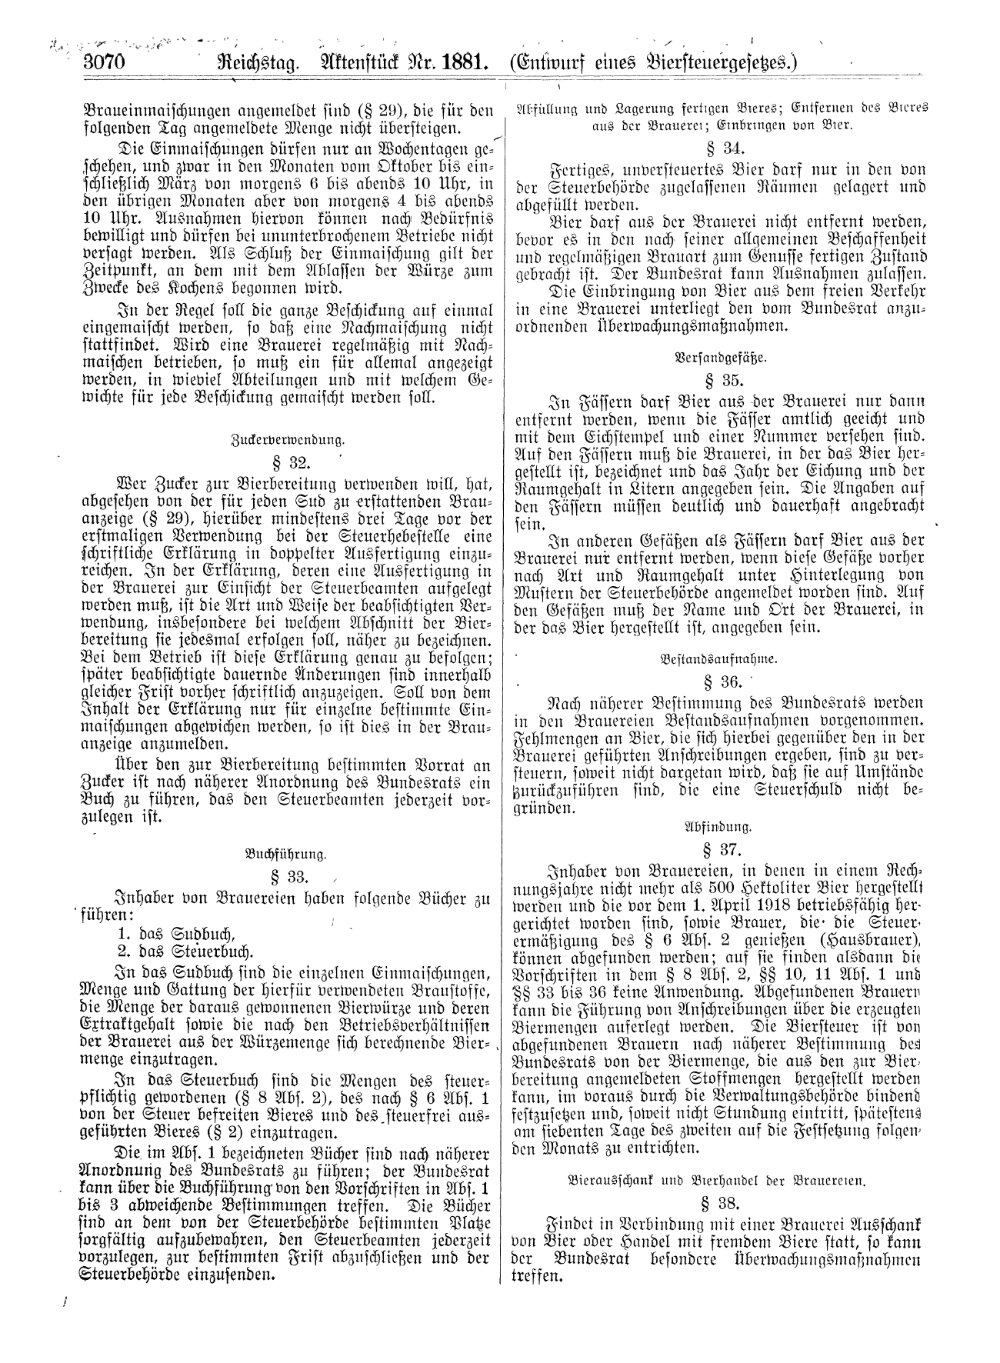 Scan of page 3070